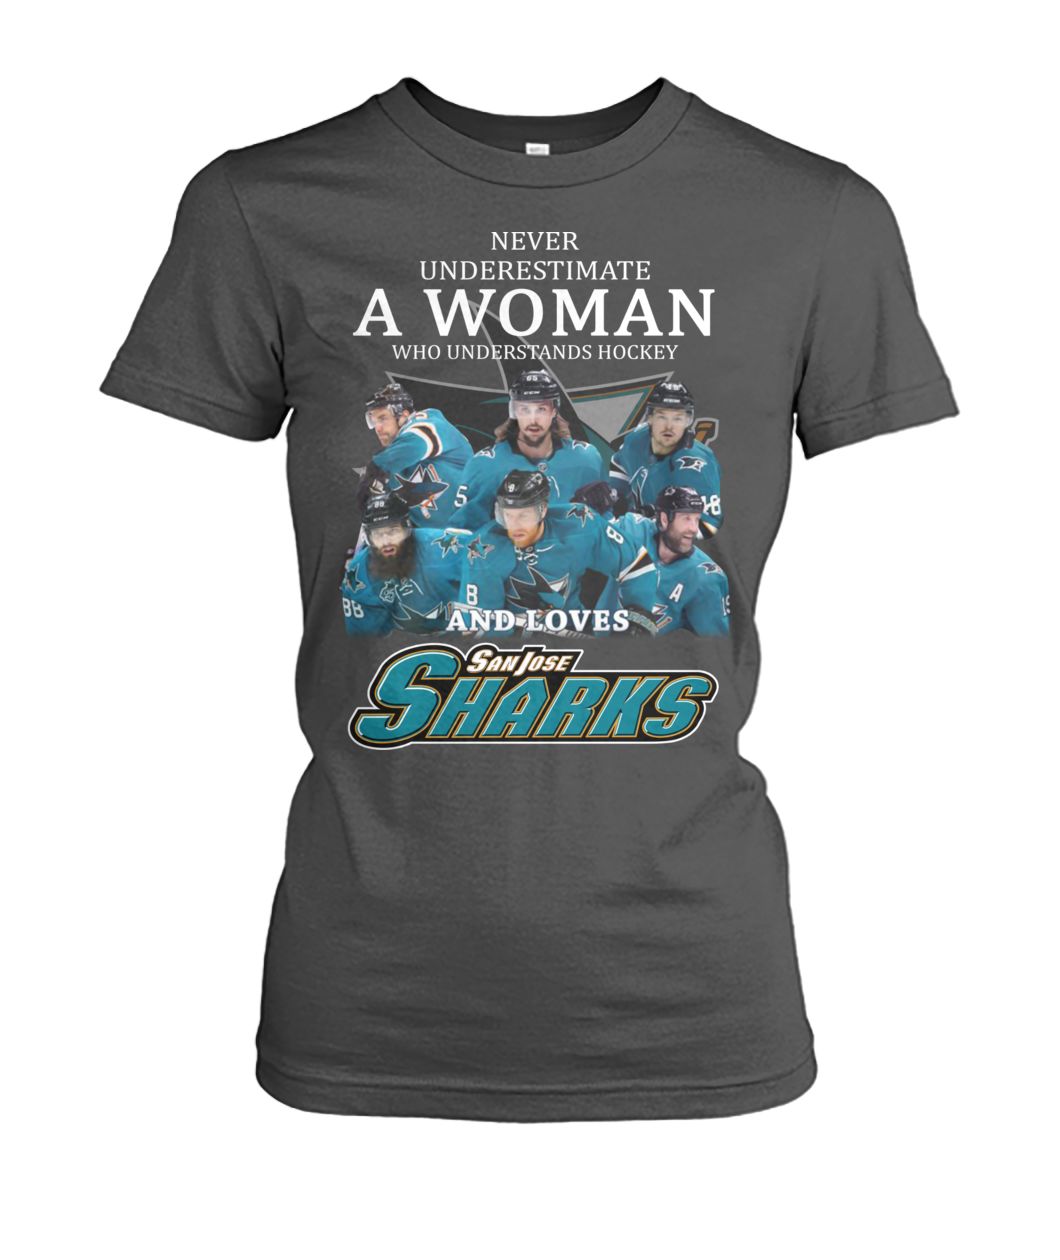 Never underestimate a woman who understands hockey and loves san jose sharks women's crew tee